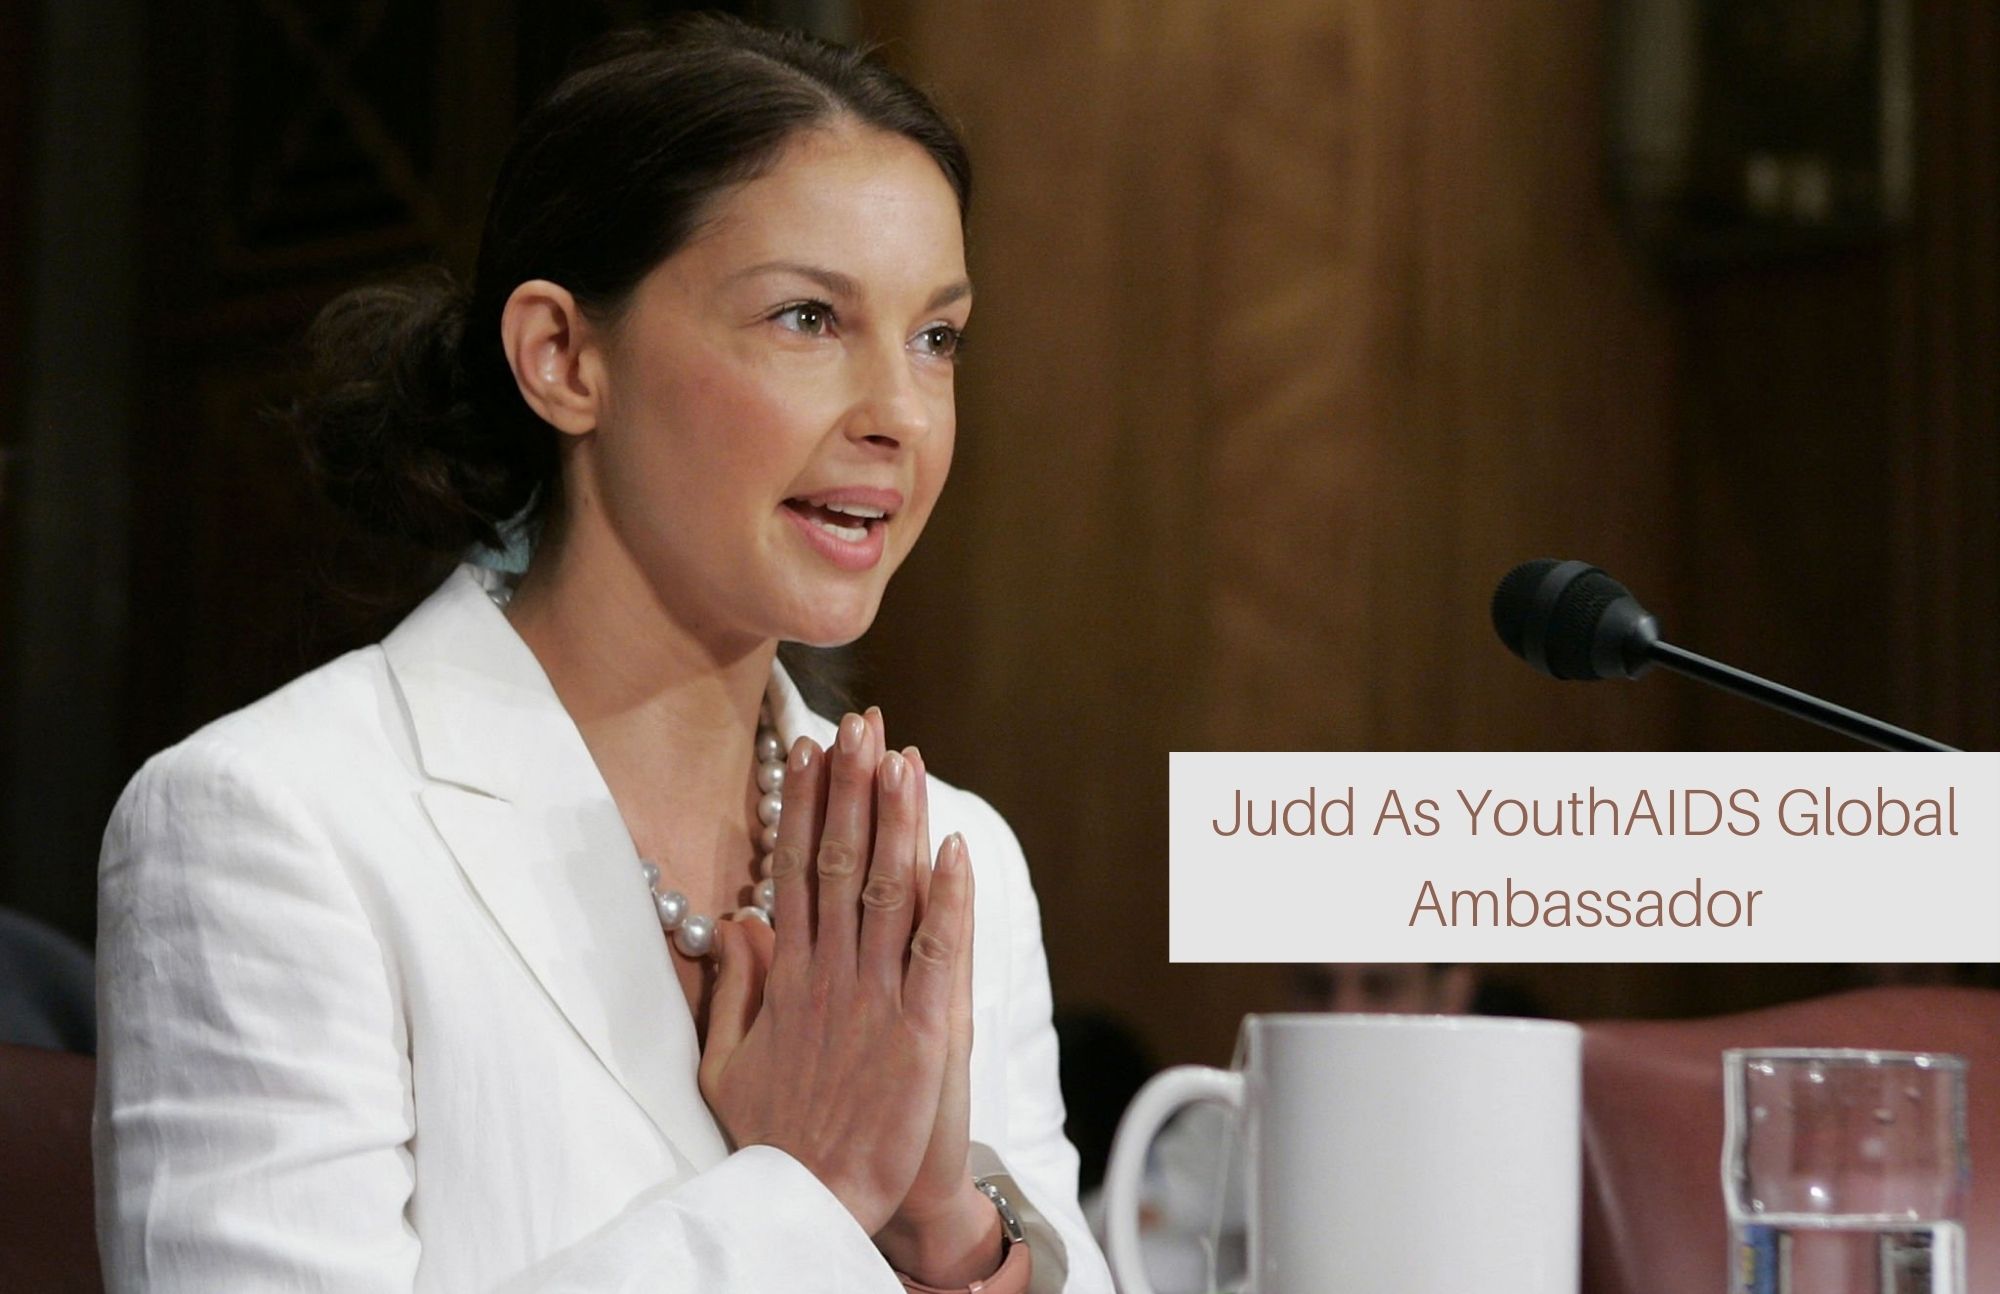 Ashley Judd is seen in a forum wearing a white dress with her hands clasped together